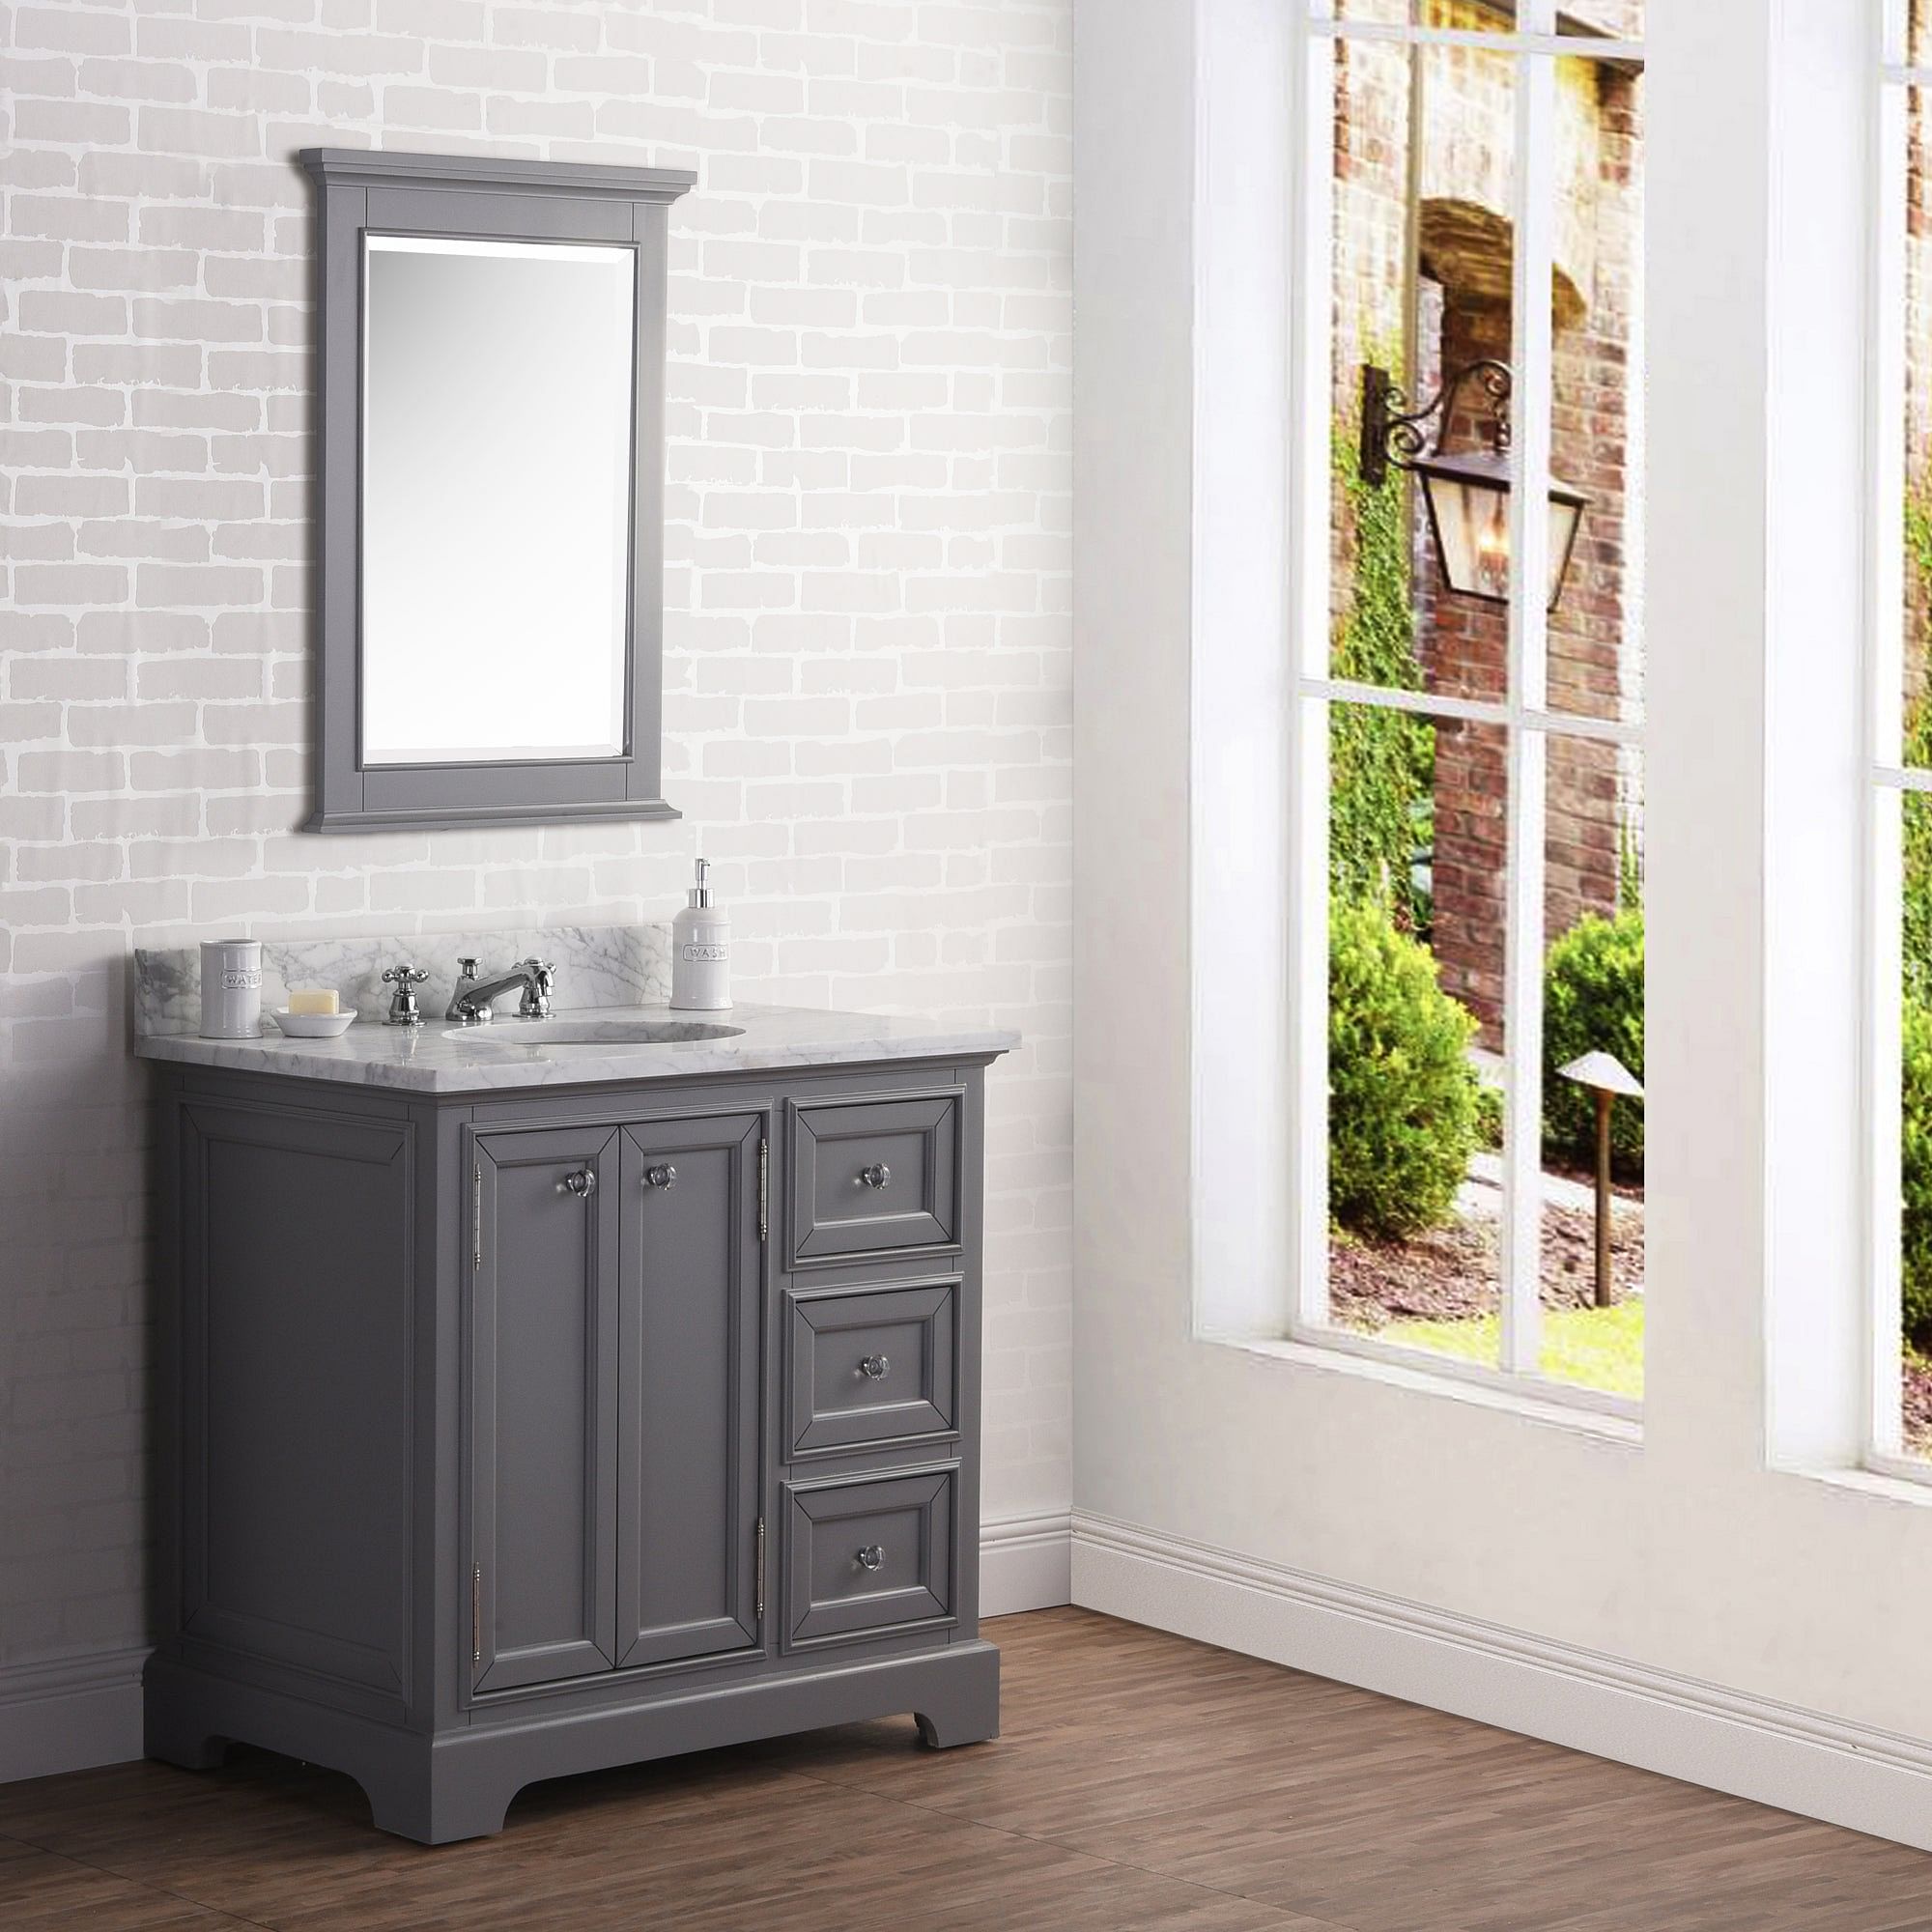 36 Inch Wide Cashmere Grey Single Sink Carrara Marble Bathroom Vanity With Matching Mirror